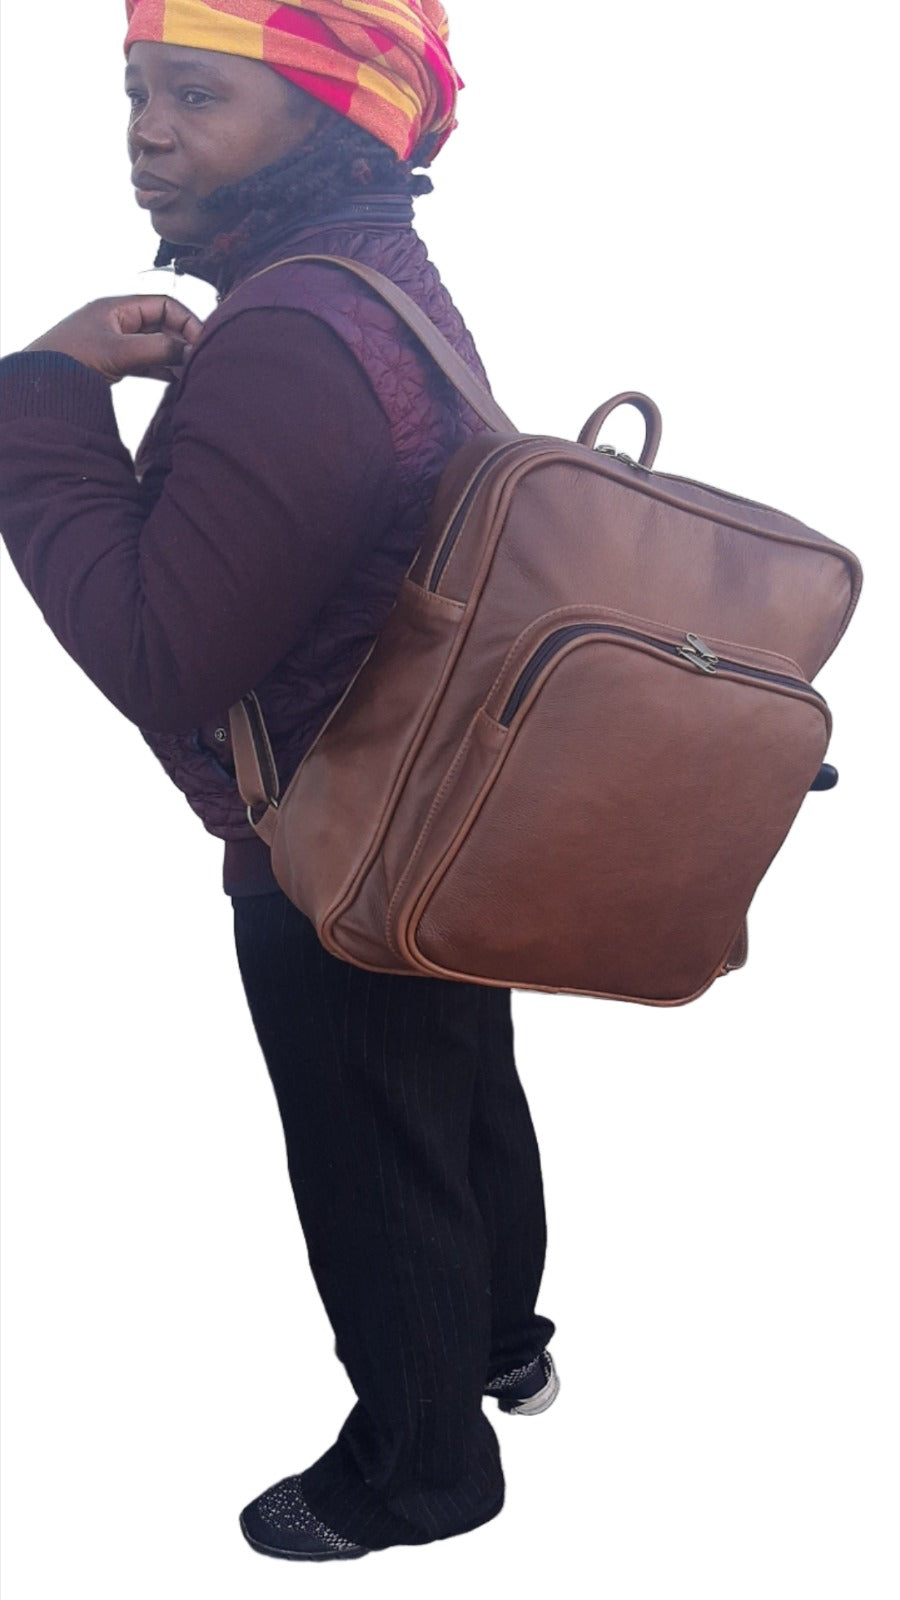 A lady carrying a beautiful genuine leather everyday backpack in pecan tan colour from Cape Masai Leather 